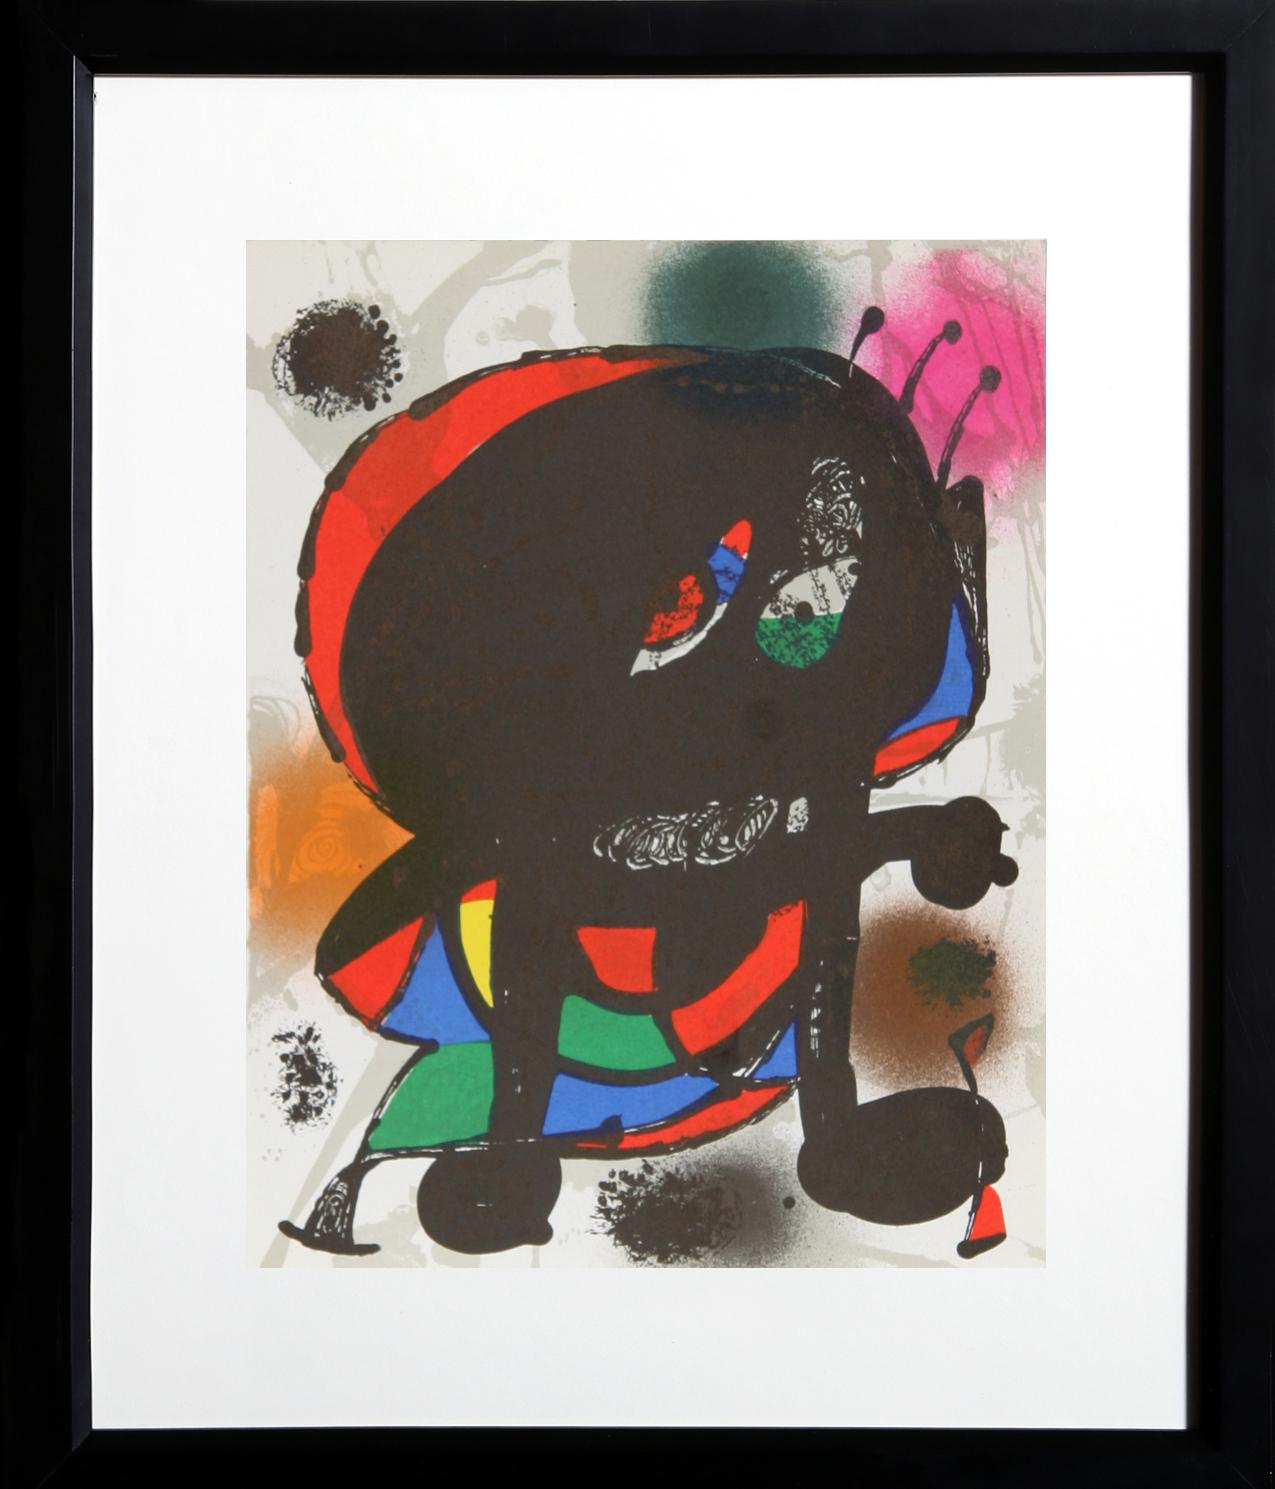 Joan Miro is known for his abstract, expressive, and child-like Modern style. Original lithograph published in Miro Lithographe III Catalogue Raisonne. Nicely framed.

Lithograph III (1115)
Joan Miro, Spanish (1893–1983)
Date: 1975
Lithograph
Size: